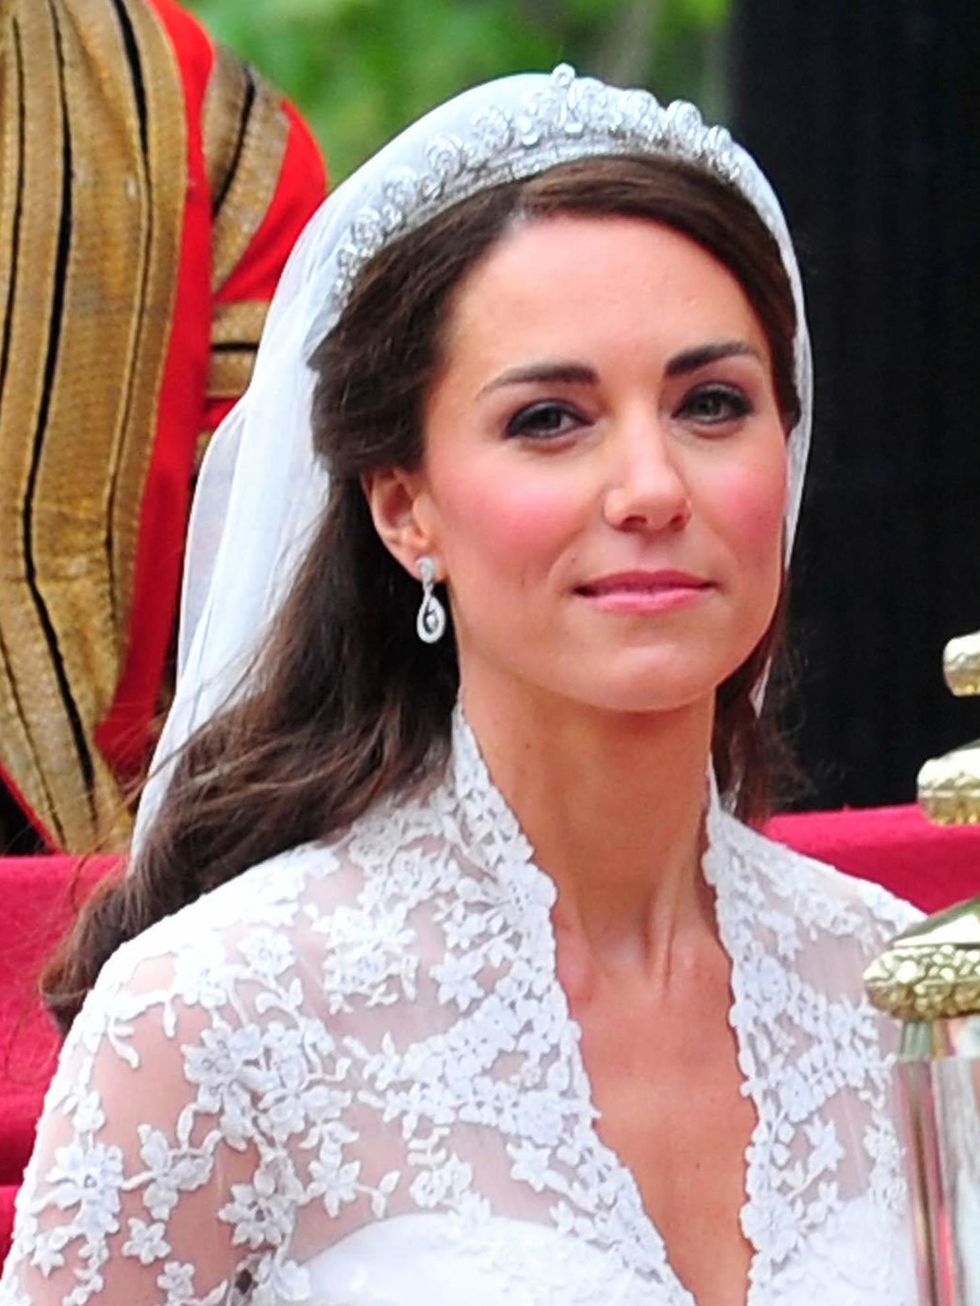 <p><a href="http://www.elleuk.com/star-style/celebrity-style-files/kate-middleton">Kate Middleton</a> wearing a diamond tiara and earrings on her <a href="http://www.elleuk.com/star-style/celebrity-fashion-trends/the-royal-wedding">royal wedding day</a>, 